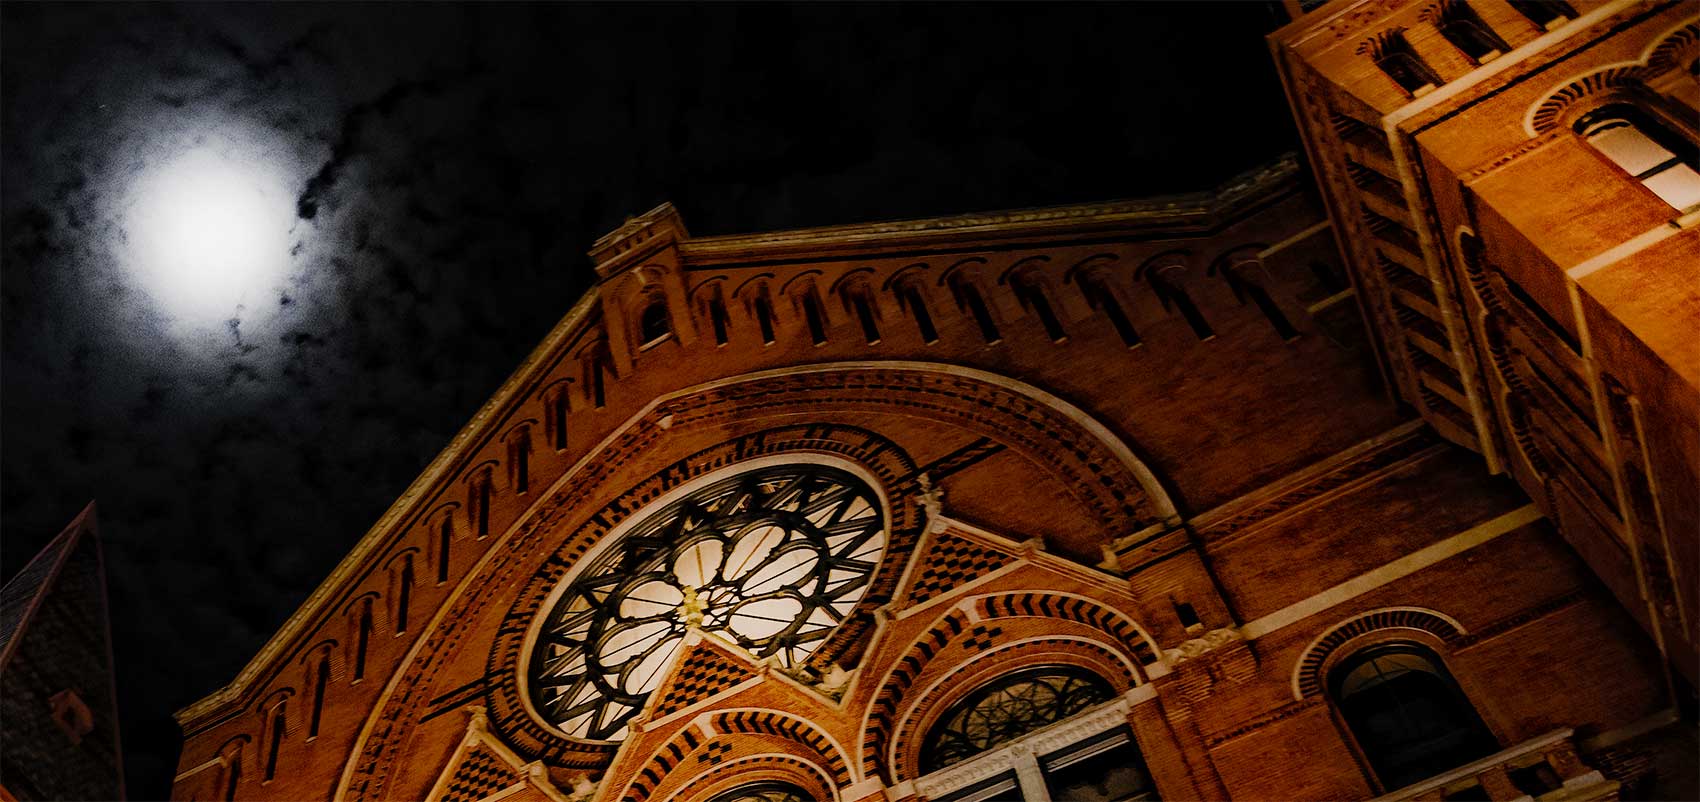 Full Moon over Music Hall following a Ghost Tour, January 2018